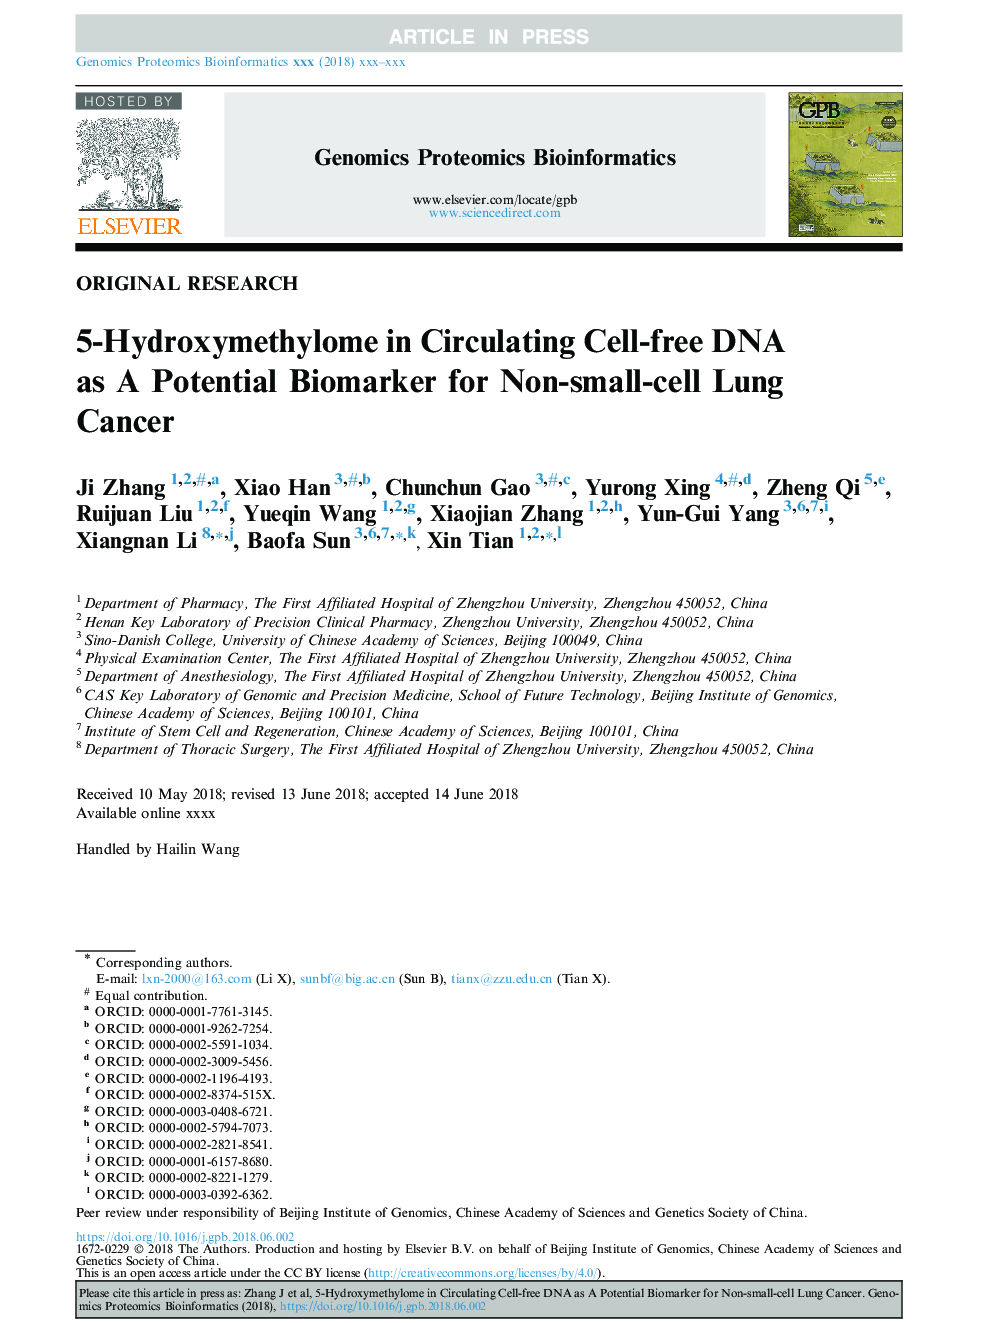 5-Hydroxymethylome in Circulating Cell-free DNA as A Potential Biomarker for Non-small-cell Lung Cancer